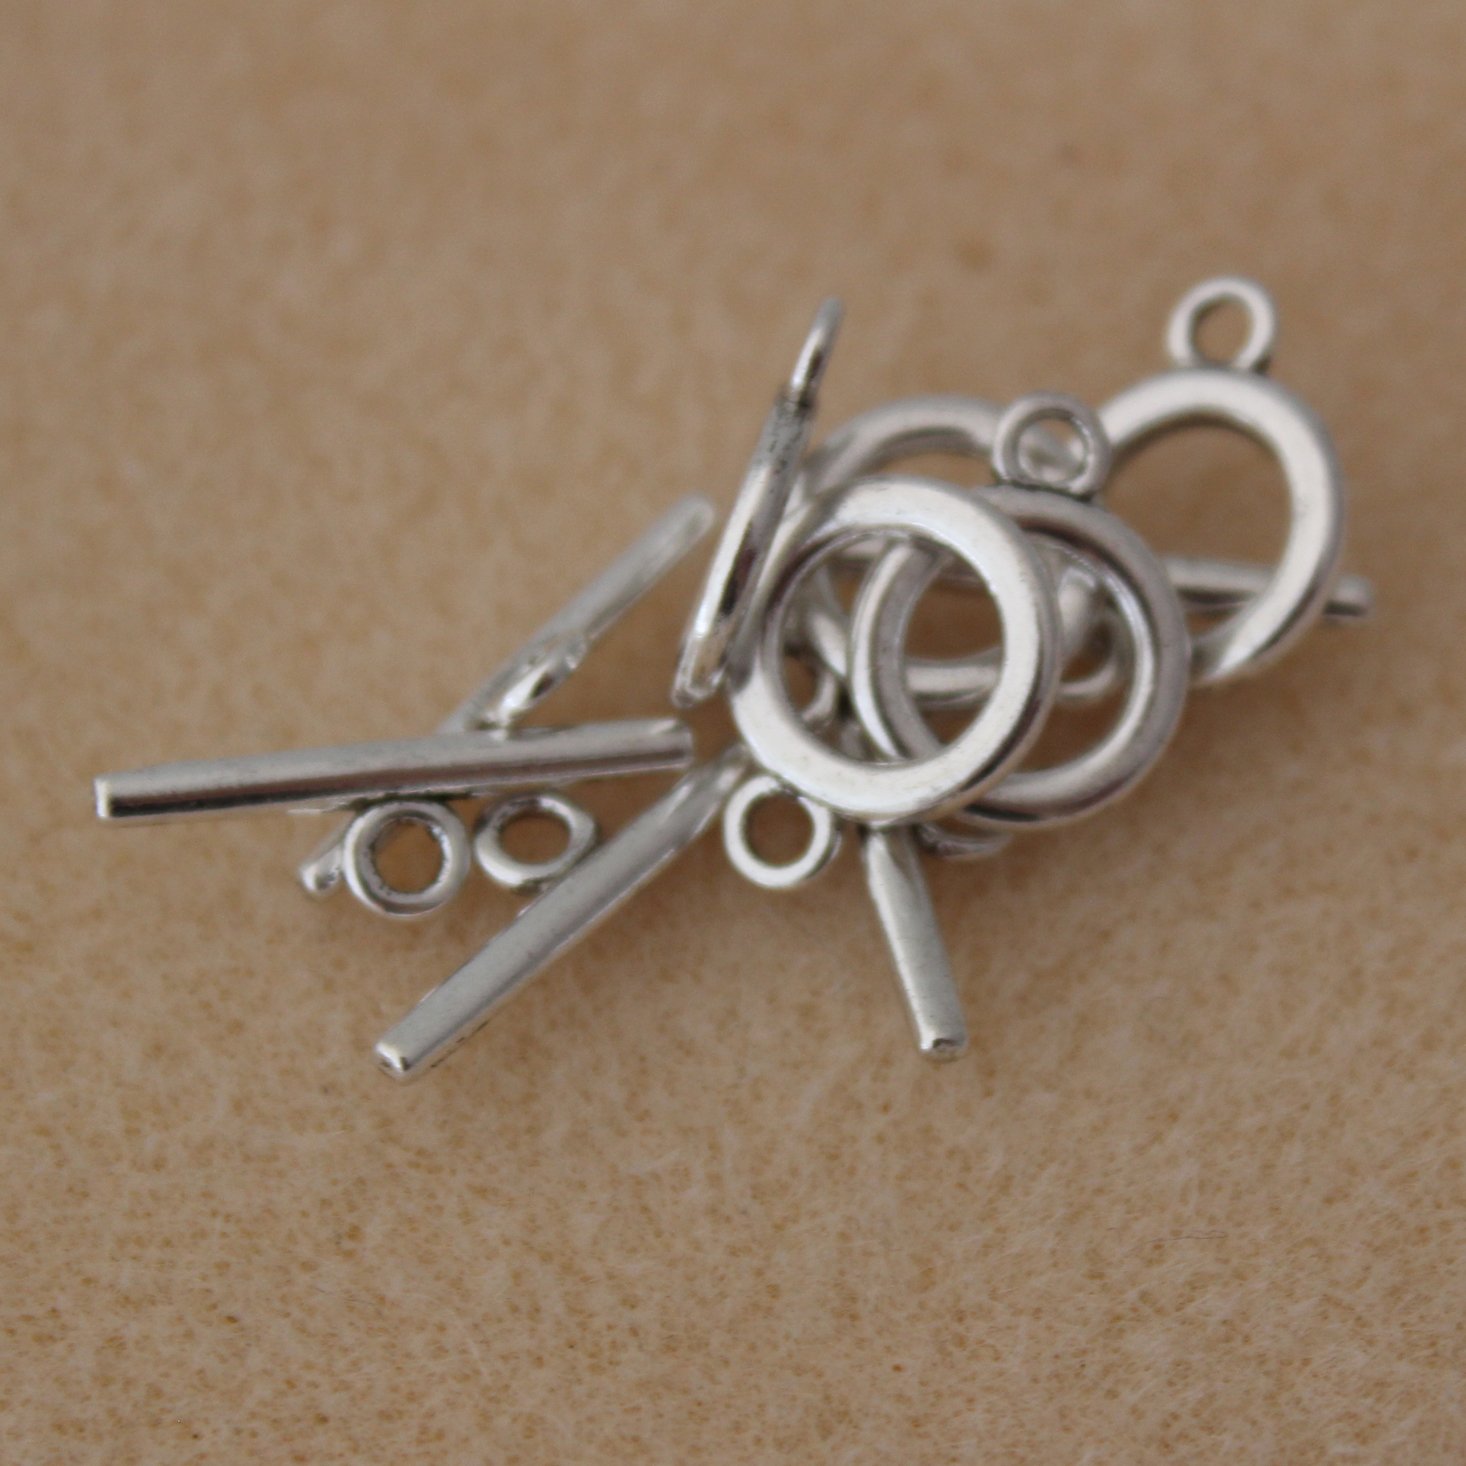 steel charm 20mm very high quality..Perfect for jewery making and other DIY projects vegetarian charm Vegetarian Vegan charm